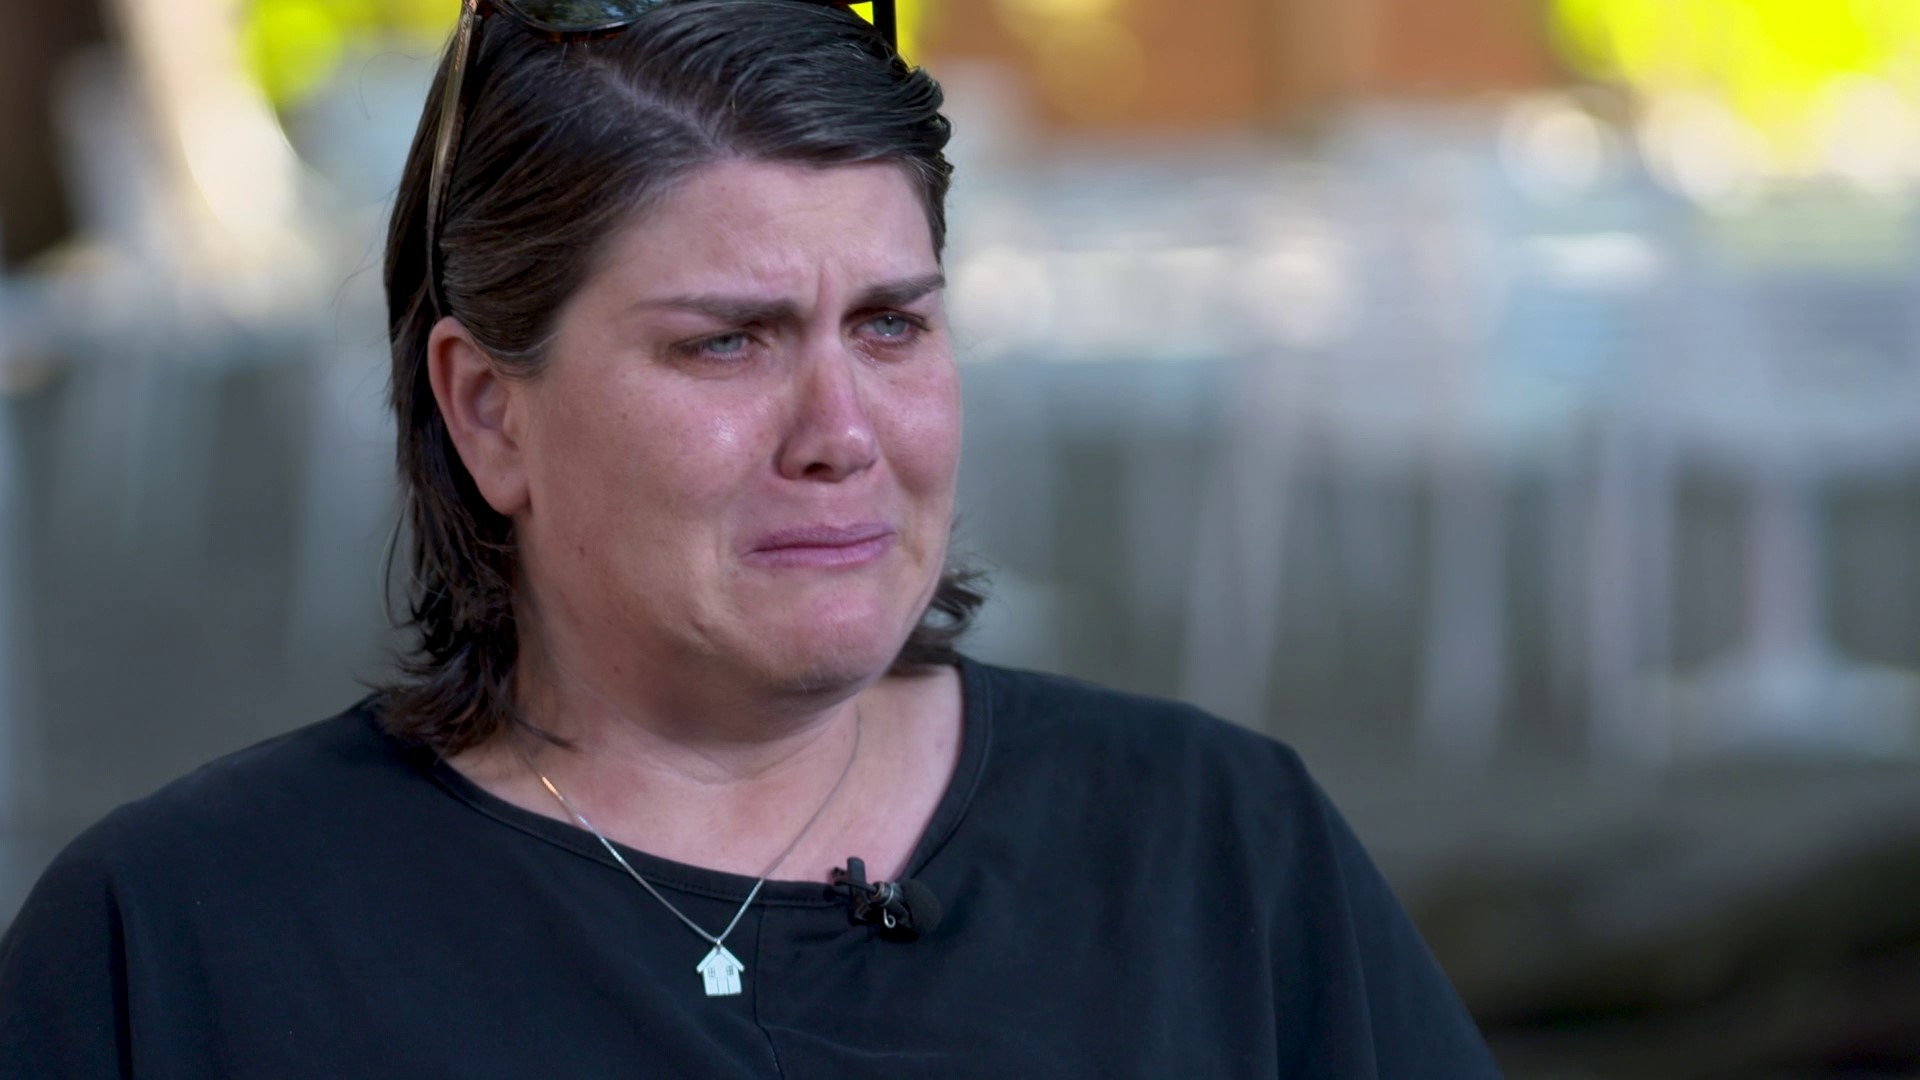 "I have friends, their whole families were slaughtered, babies, children," Aya Margalit told WFAA, crying.